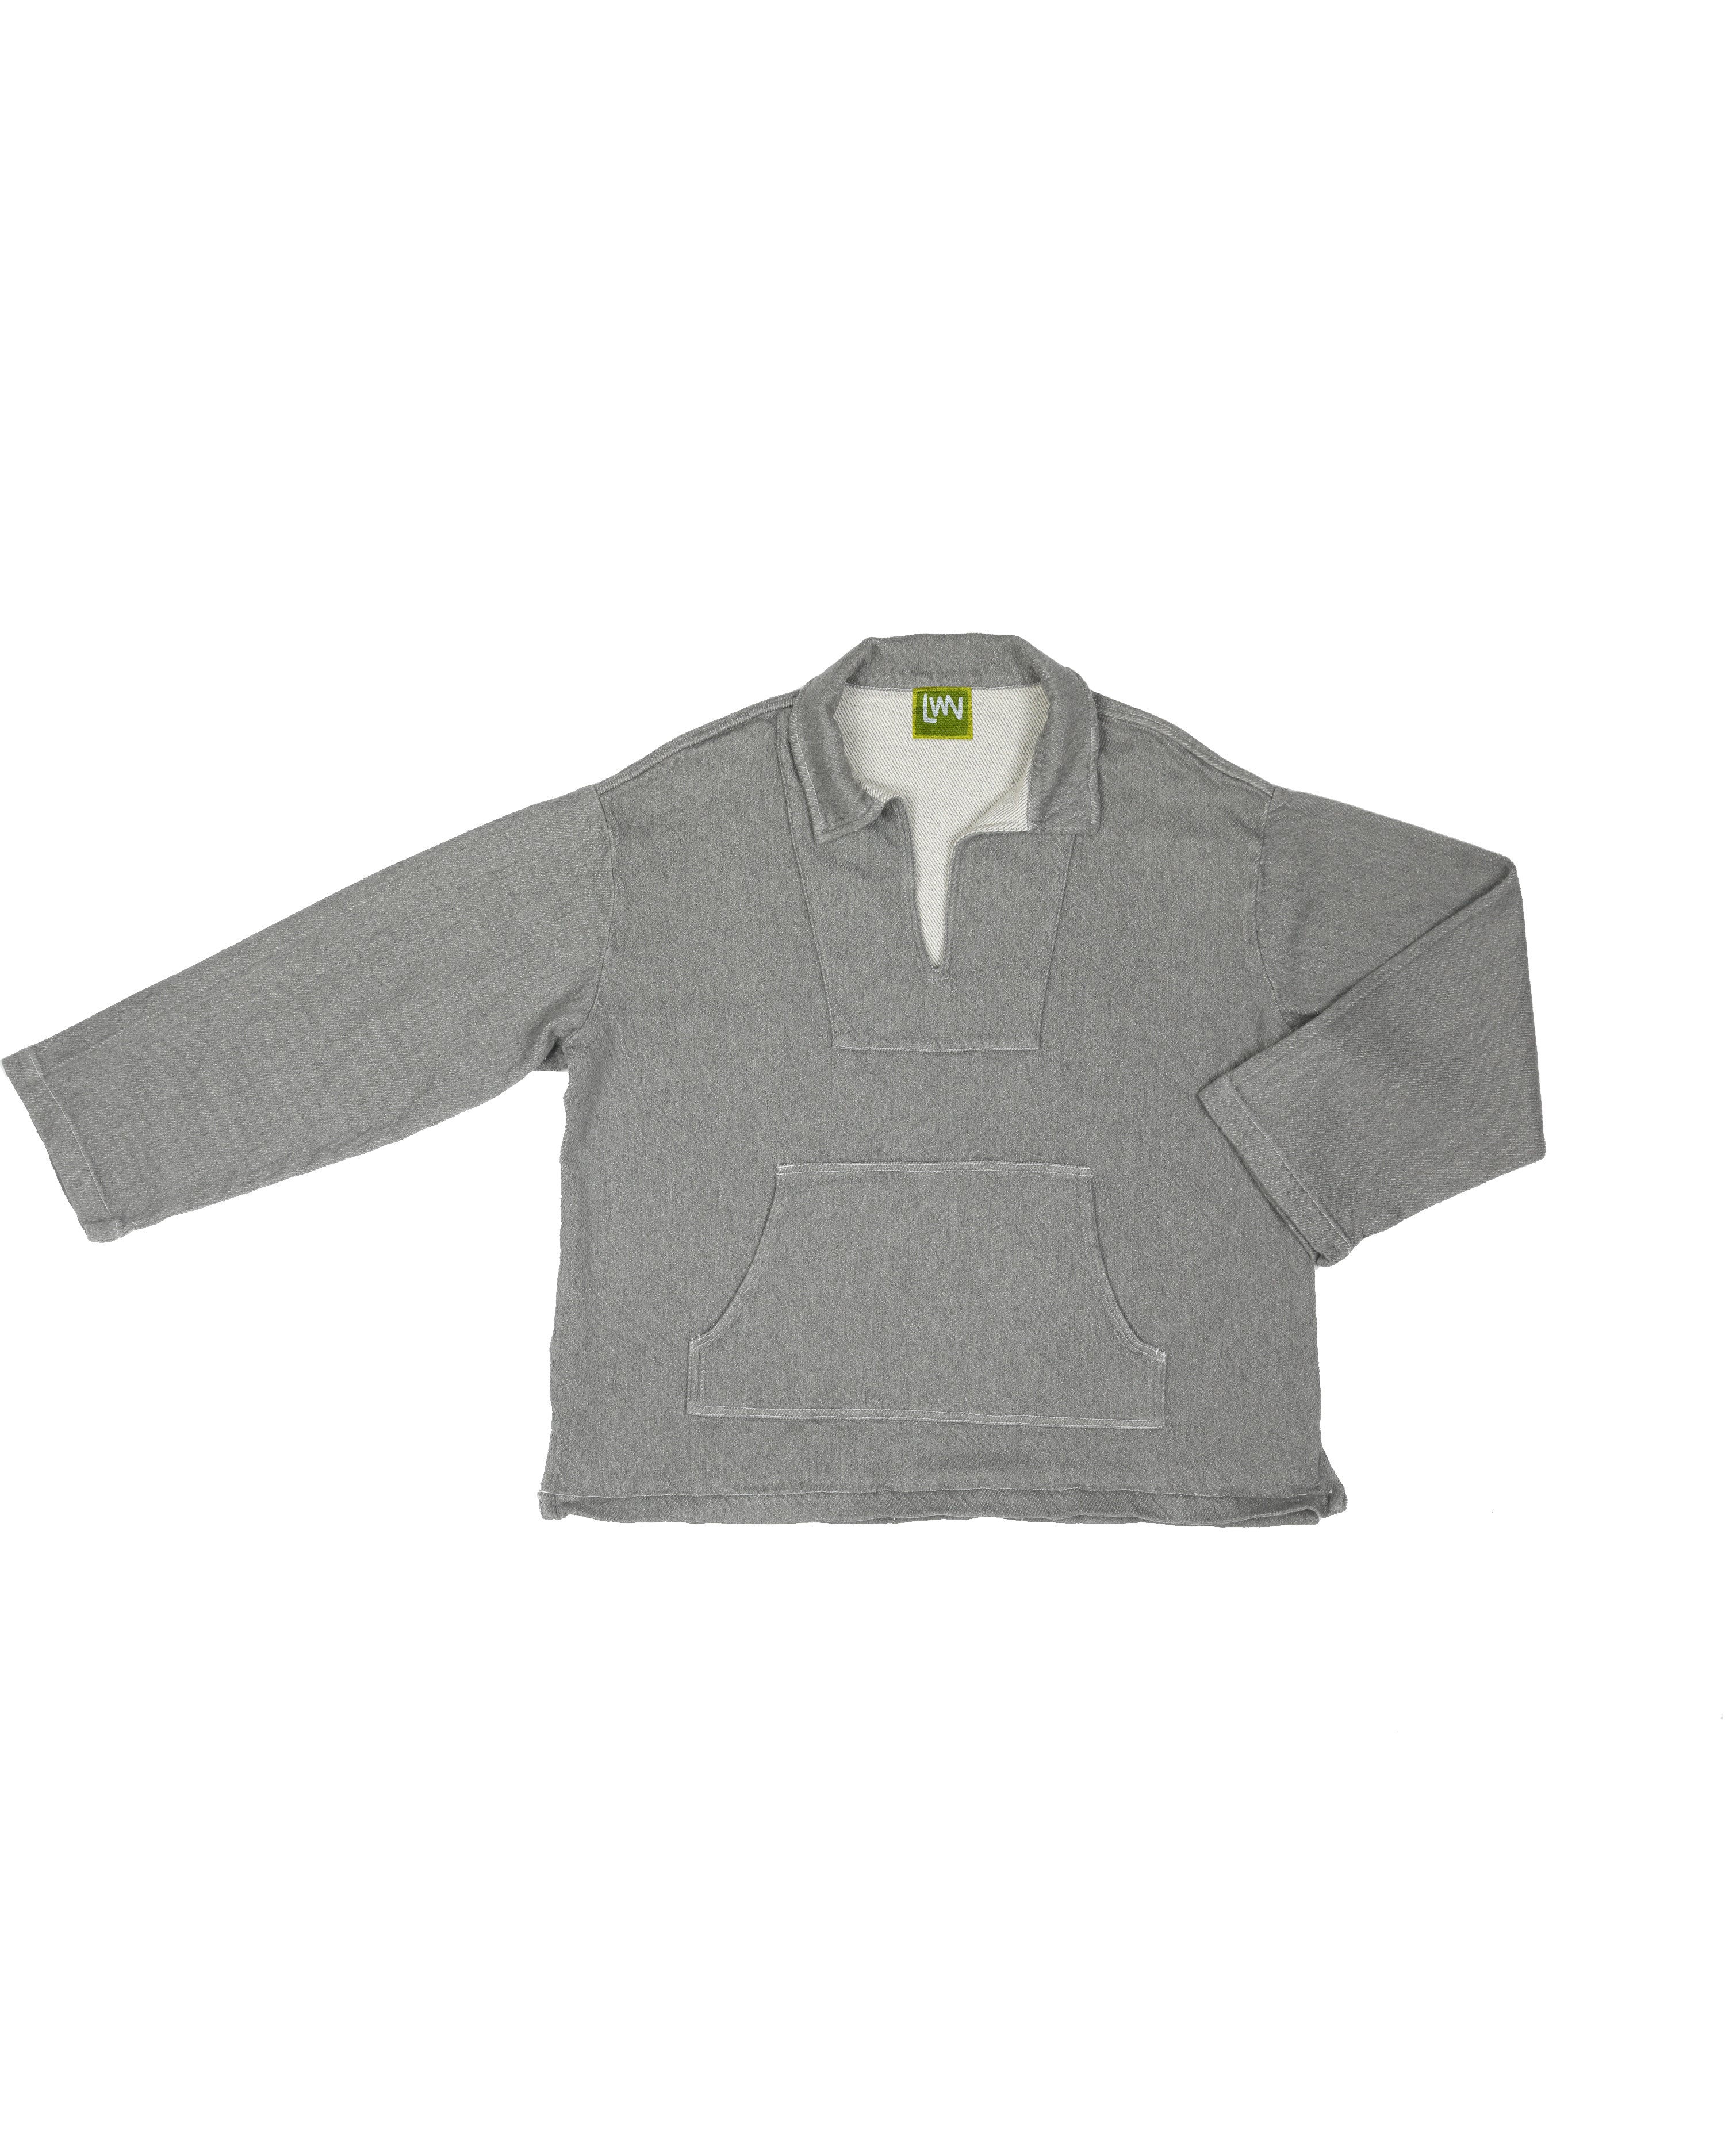 Agave Top - Heather Gray - Japanese Double Twill